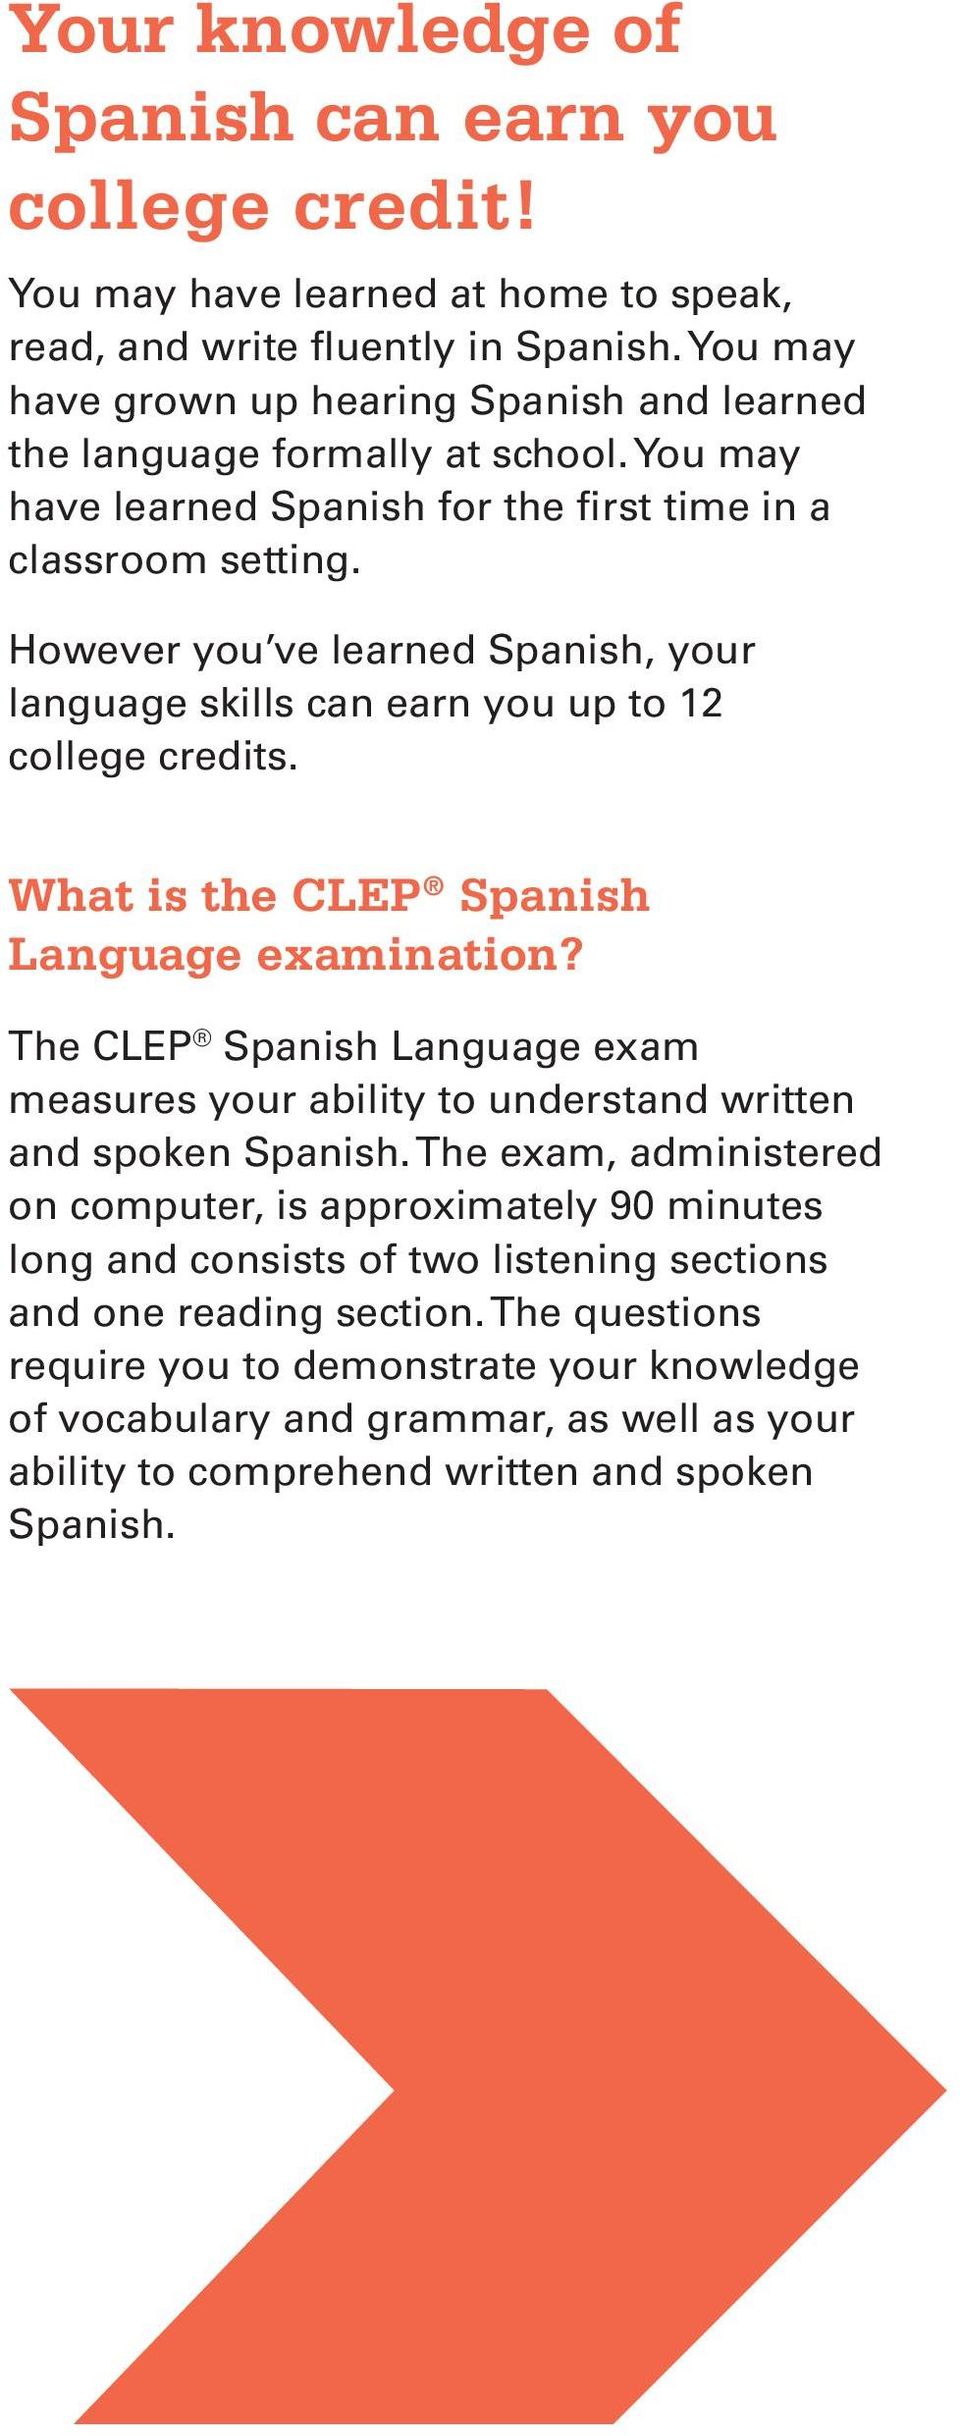 However you ve learned Spanish, your language skills can earn you up to 12 college credits. What is the CLEP Spanish Language examination?